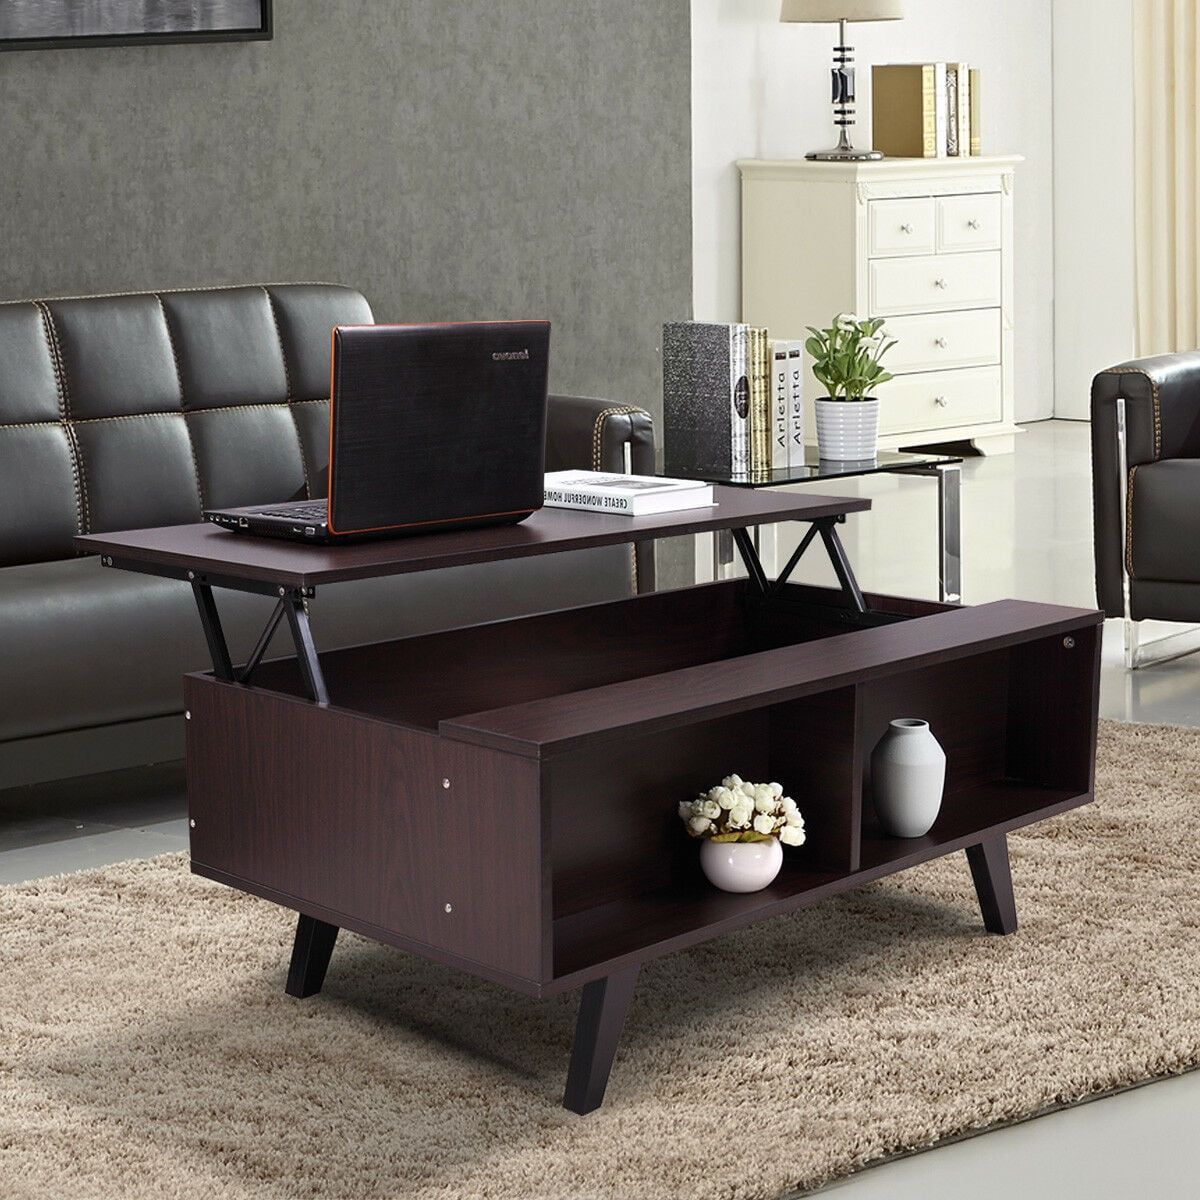 Lowestbest Lift Top Coffee Table, Wood, Cocktail Table With Hidden Within Coffee Tables With Open Storage Shelves (View 18 of 20)